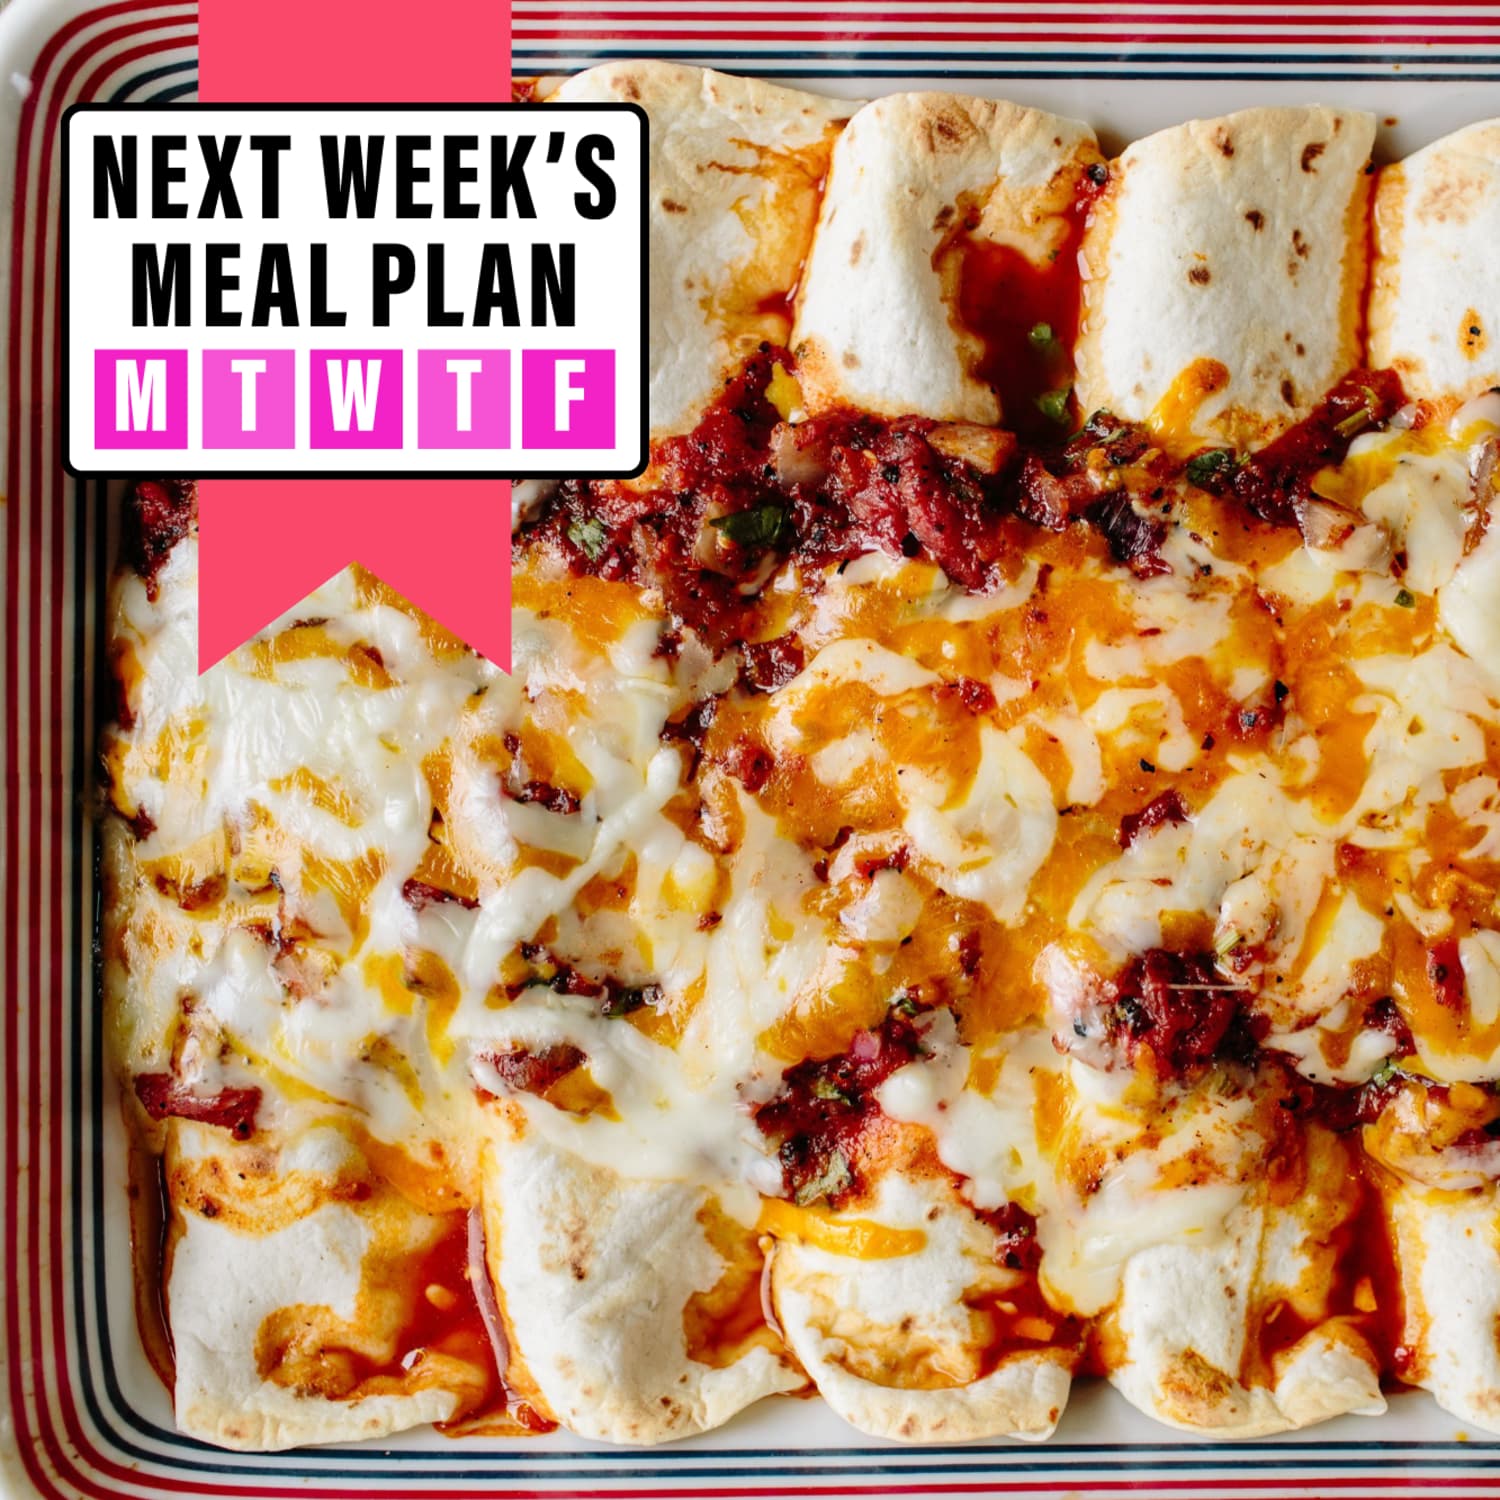 Budget-conscious meal planning ideas